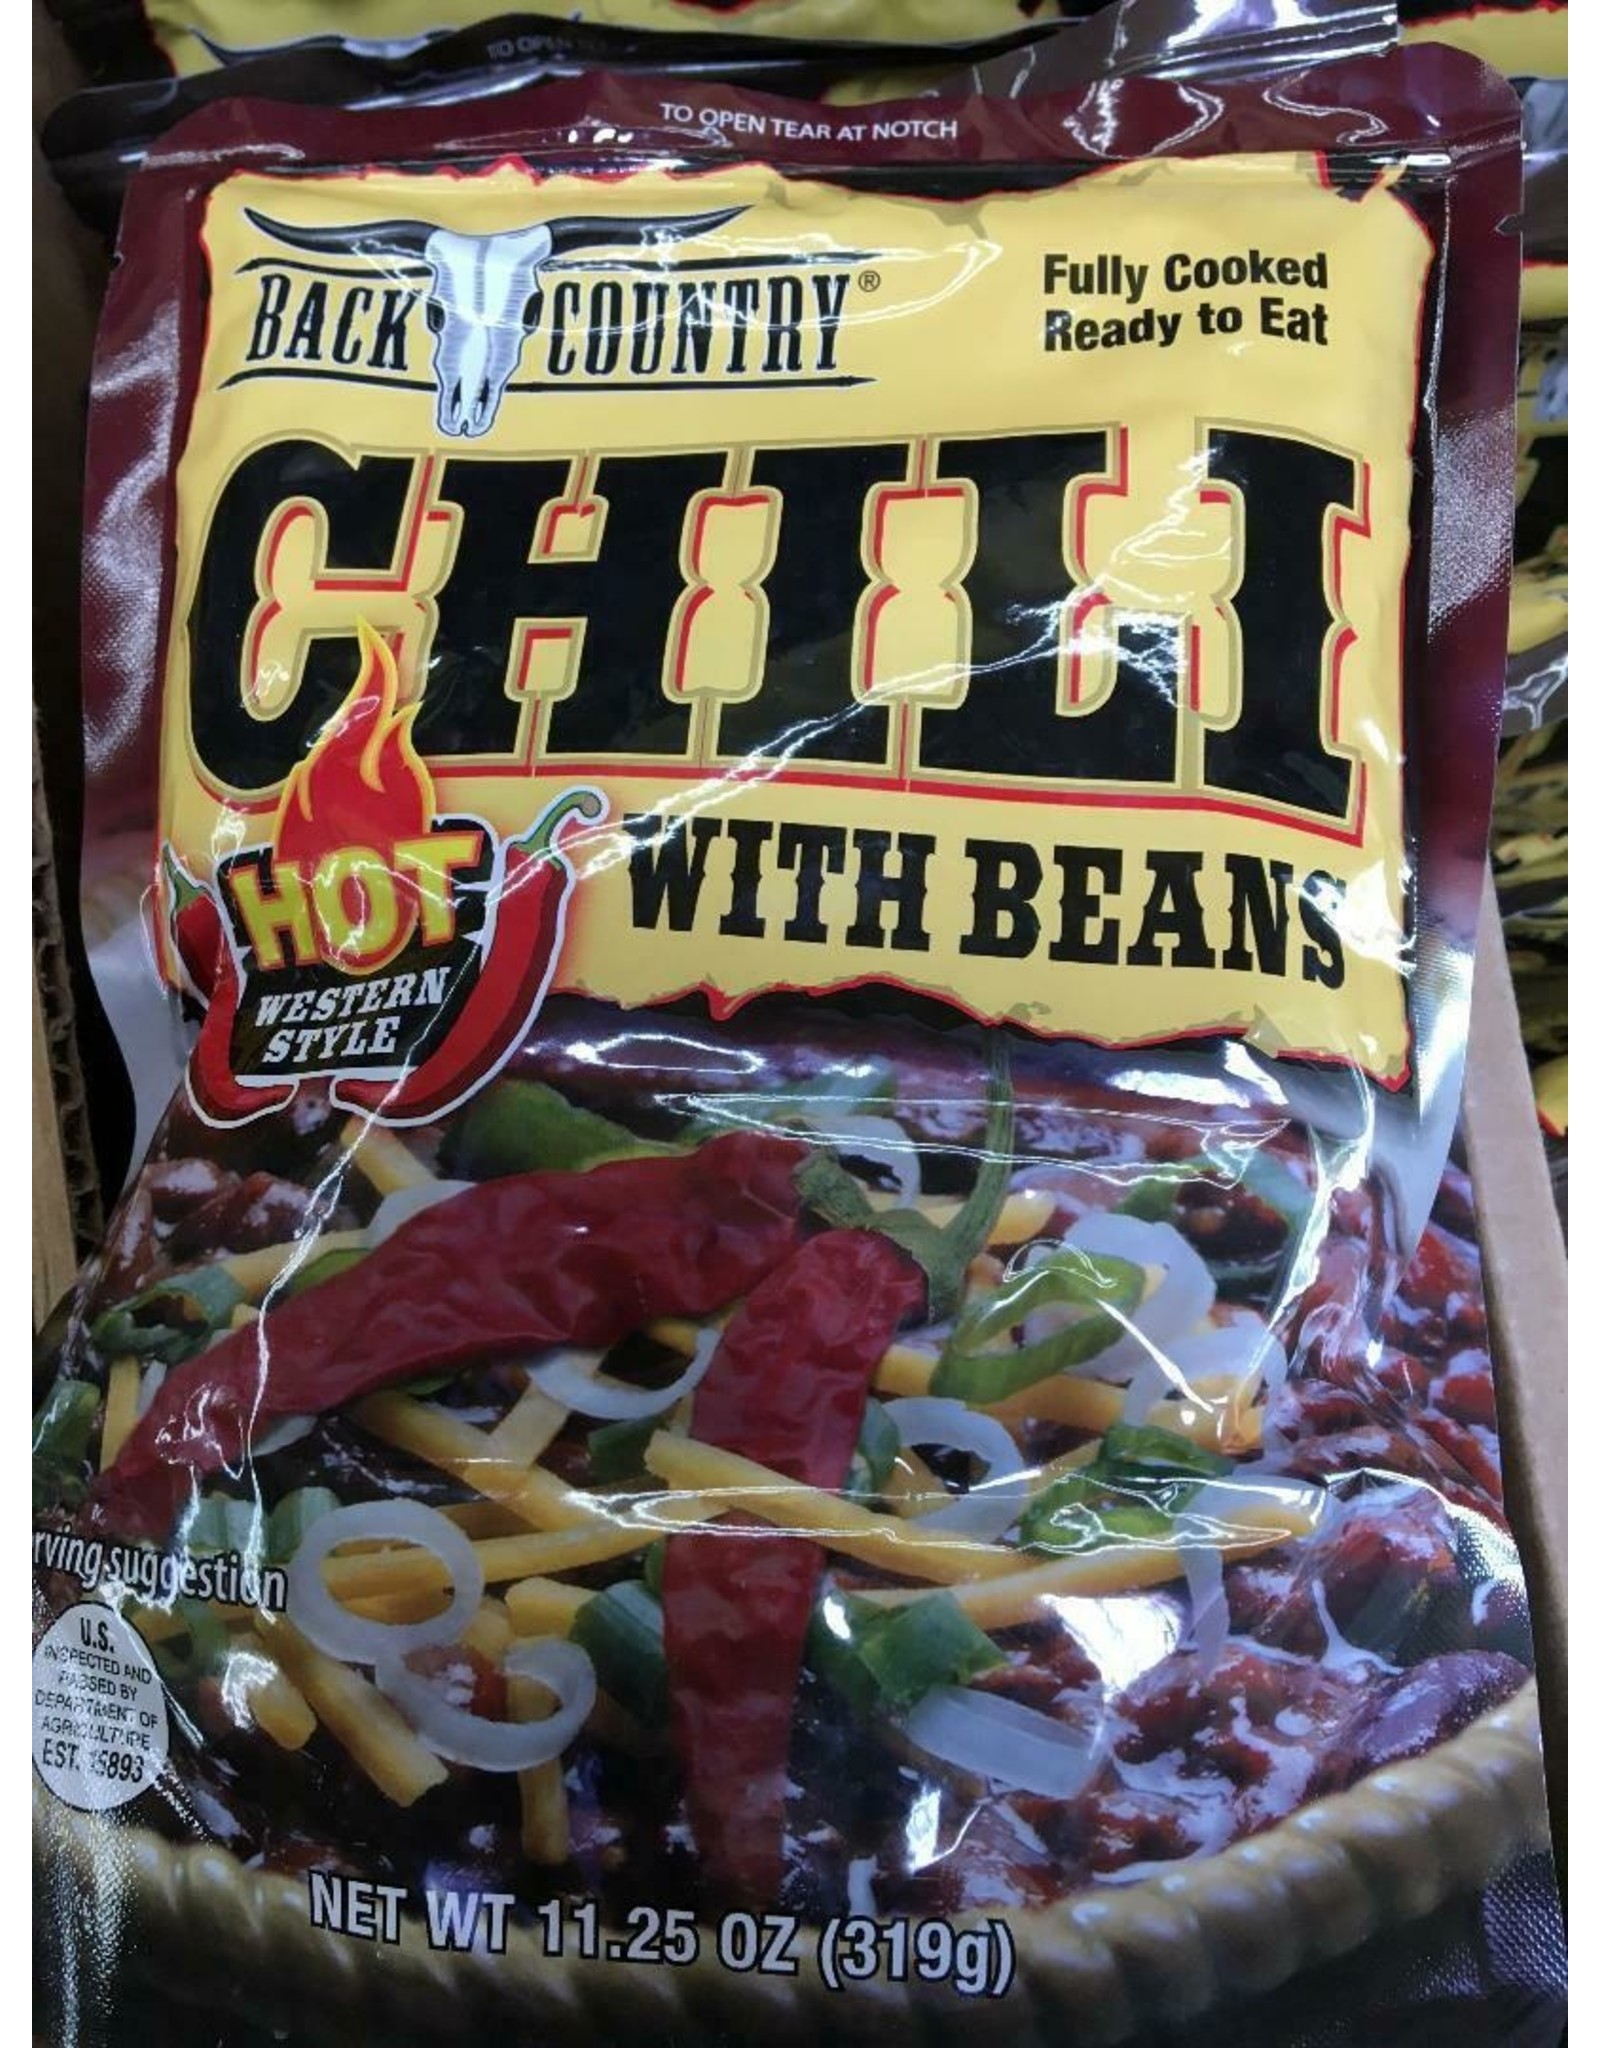 SWISS LINK CHILI WITH BEANS (HOT)